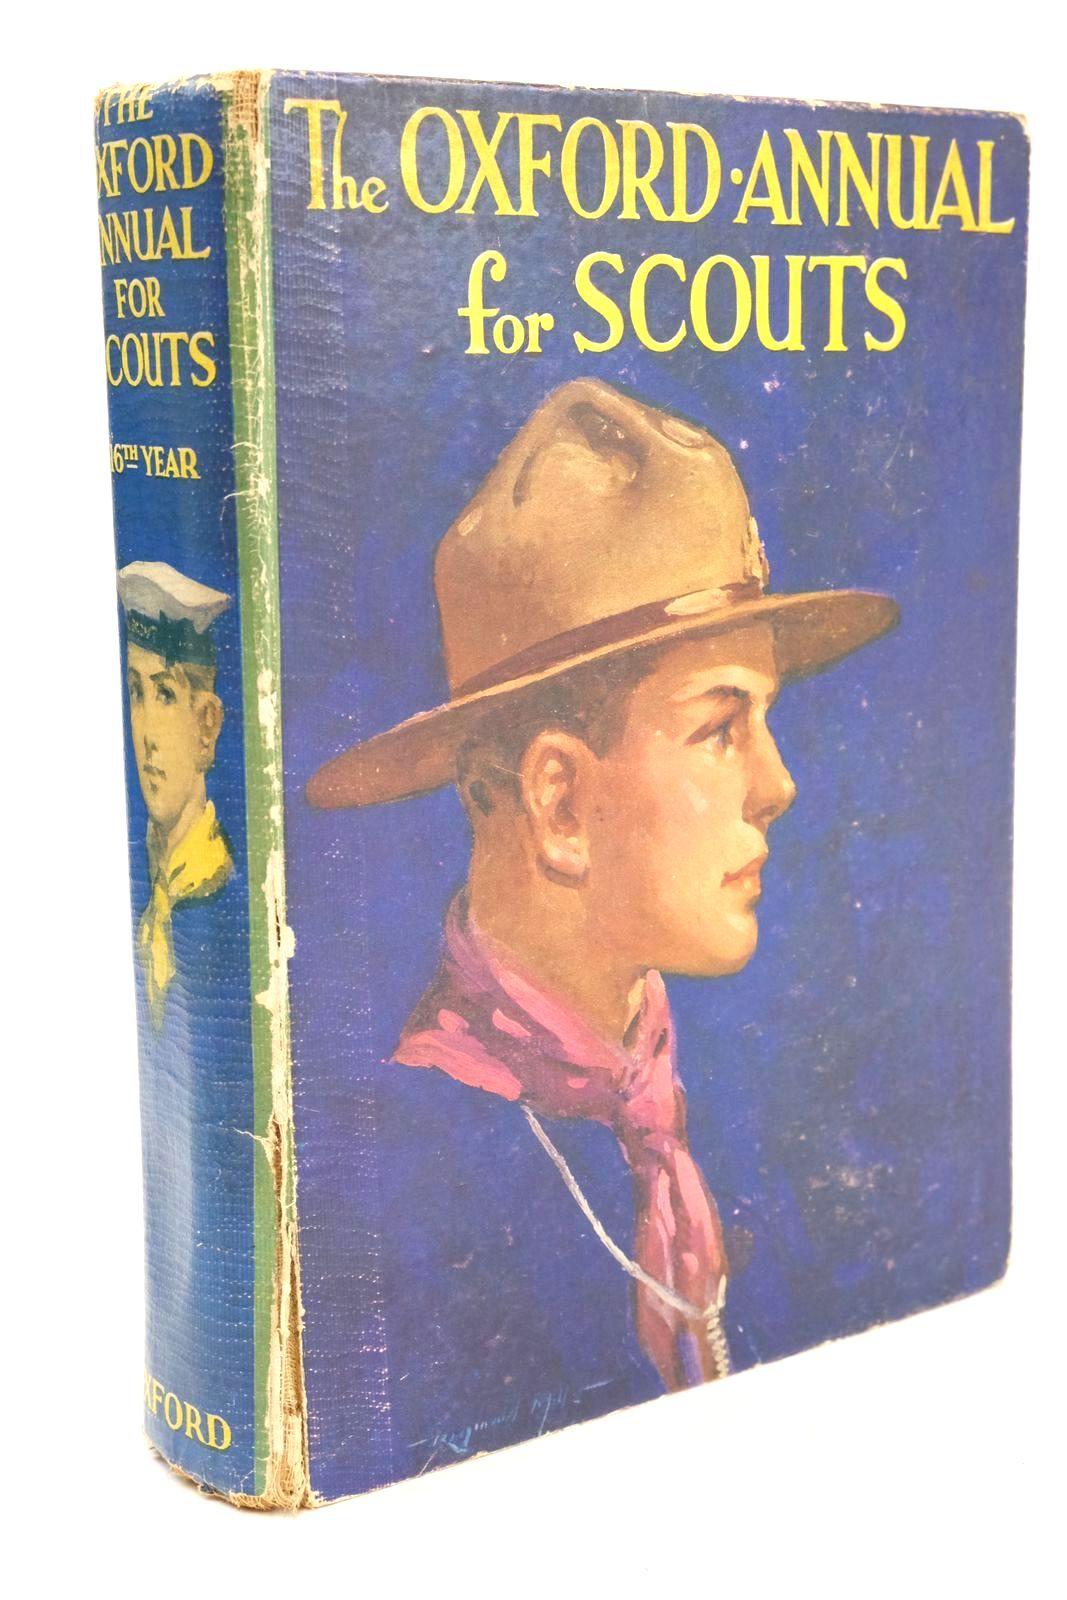 Photo of THE OXFORD ANNUAL FOR SCOUTS 16TH YEAR written by Strang, Herbert Prater, James H. Gorman, Major J.T. et al, illustrated by Coales, K.W. Wigfull, W. Edward et al., published by Oxford University Press, Humphrey Milford (STOCK CODE: 1324759)  for sale by Stella & Rose's Books